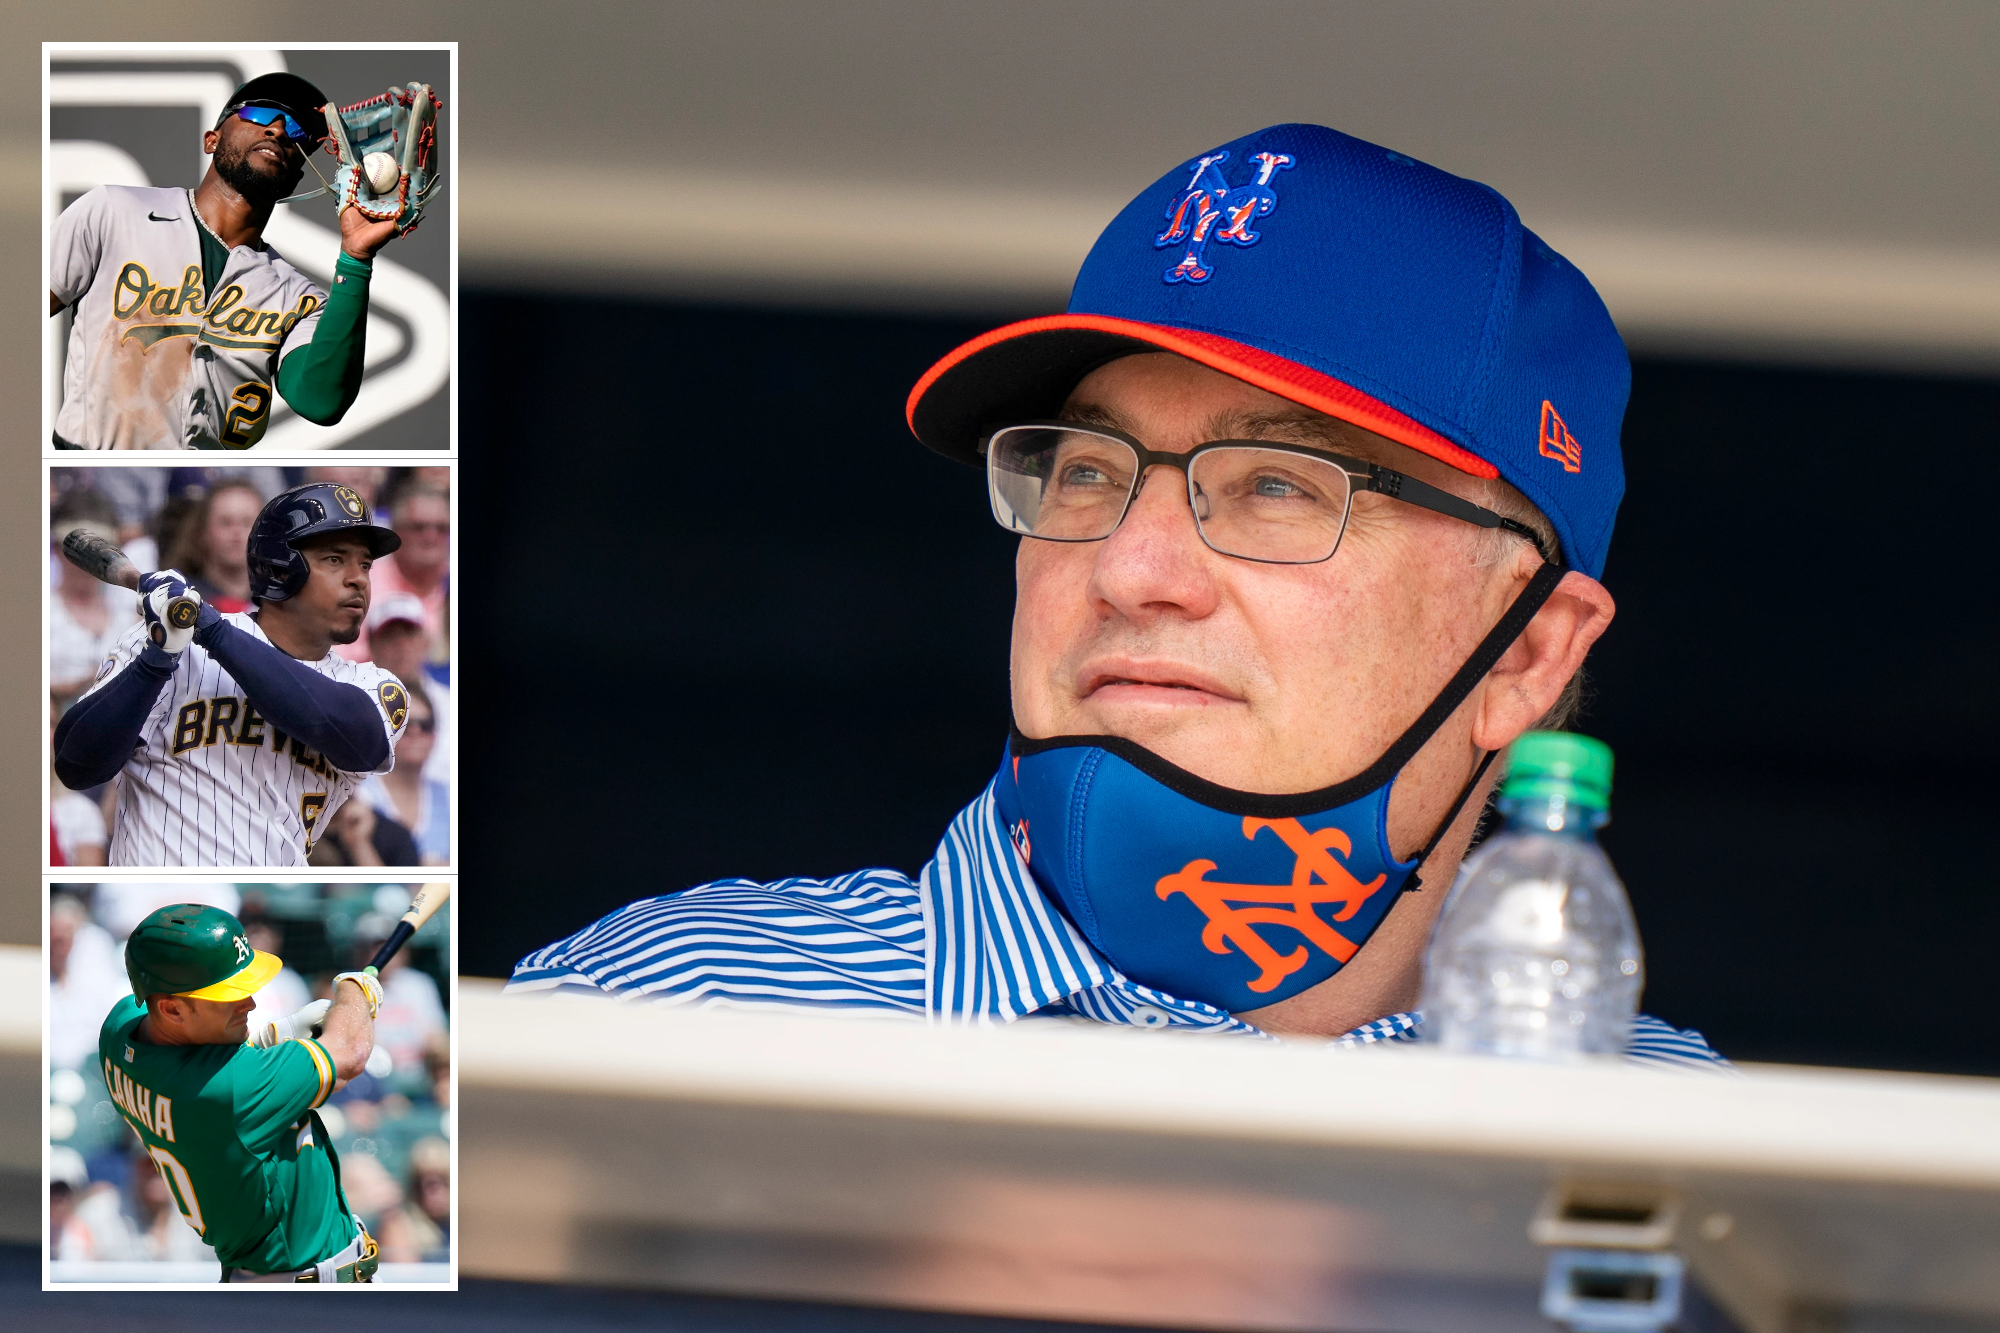 Steve Cohen can provide you the cash for harmful Mets spending spree and what comes next: Sherman